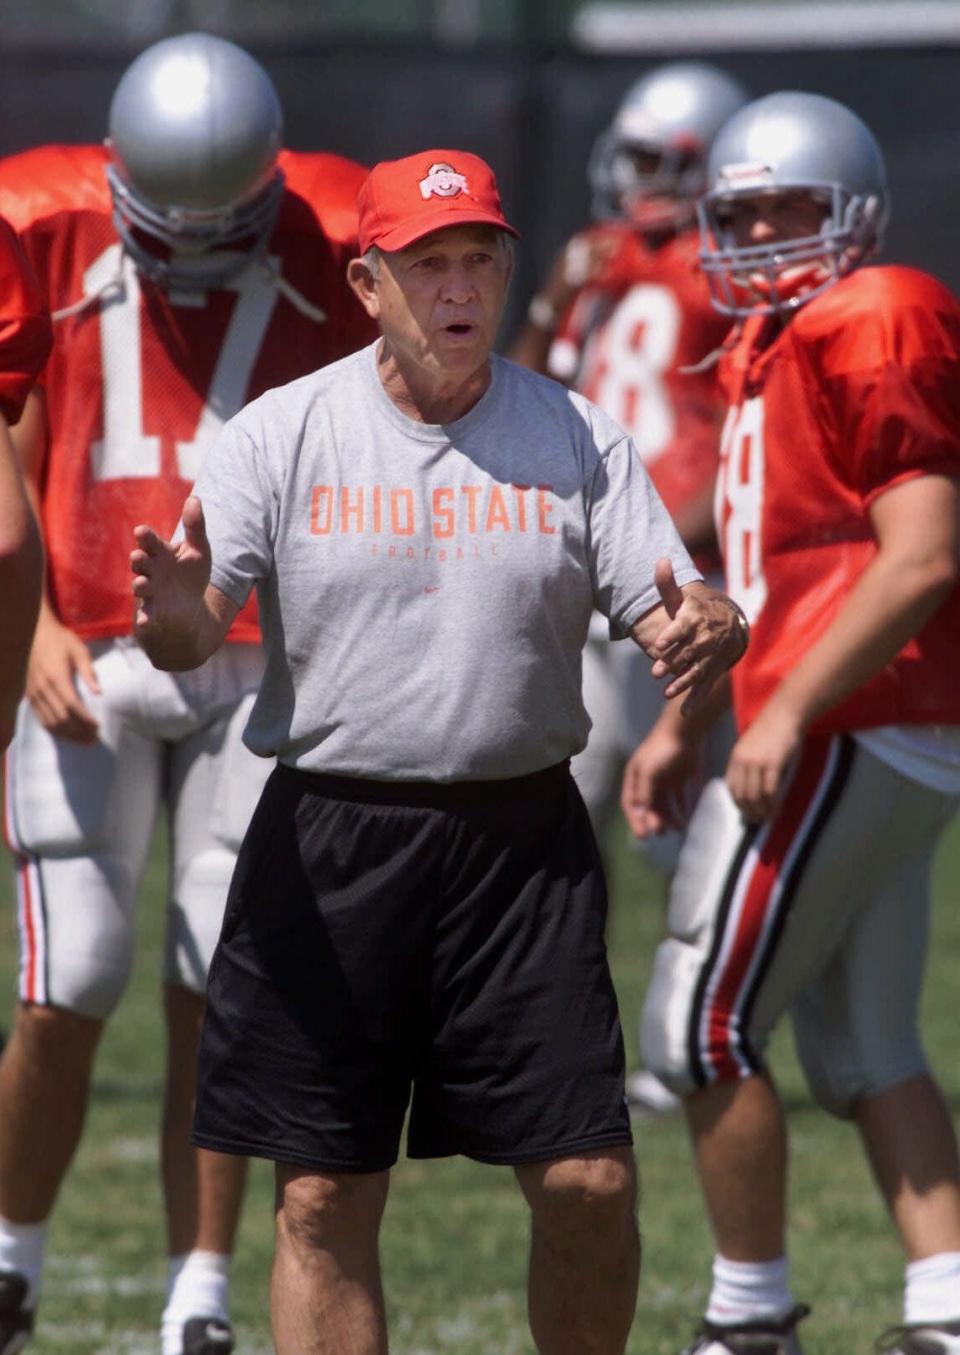 Ohio State assistant football coach Chuck Stobart instructs his players during practice Wednesday, Aug. 16, 2000, at the Woody Hayes Athletic Facility in Columbus, Ohio. (AP Photo/Columbus Dispatch, Neal C. Lauron)